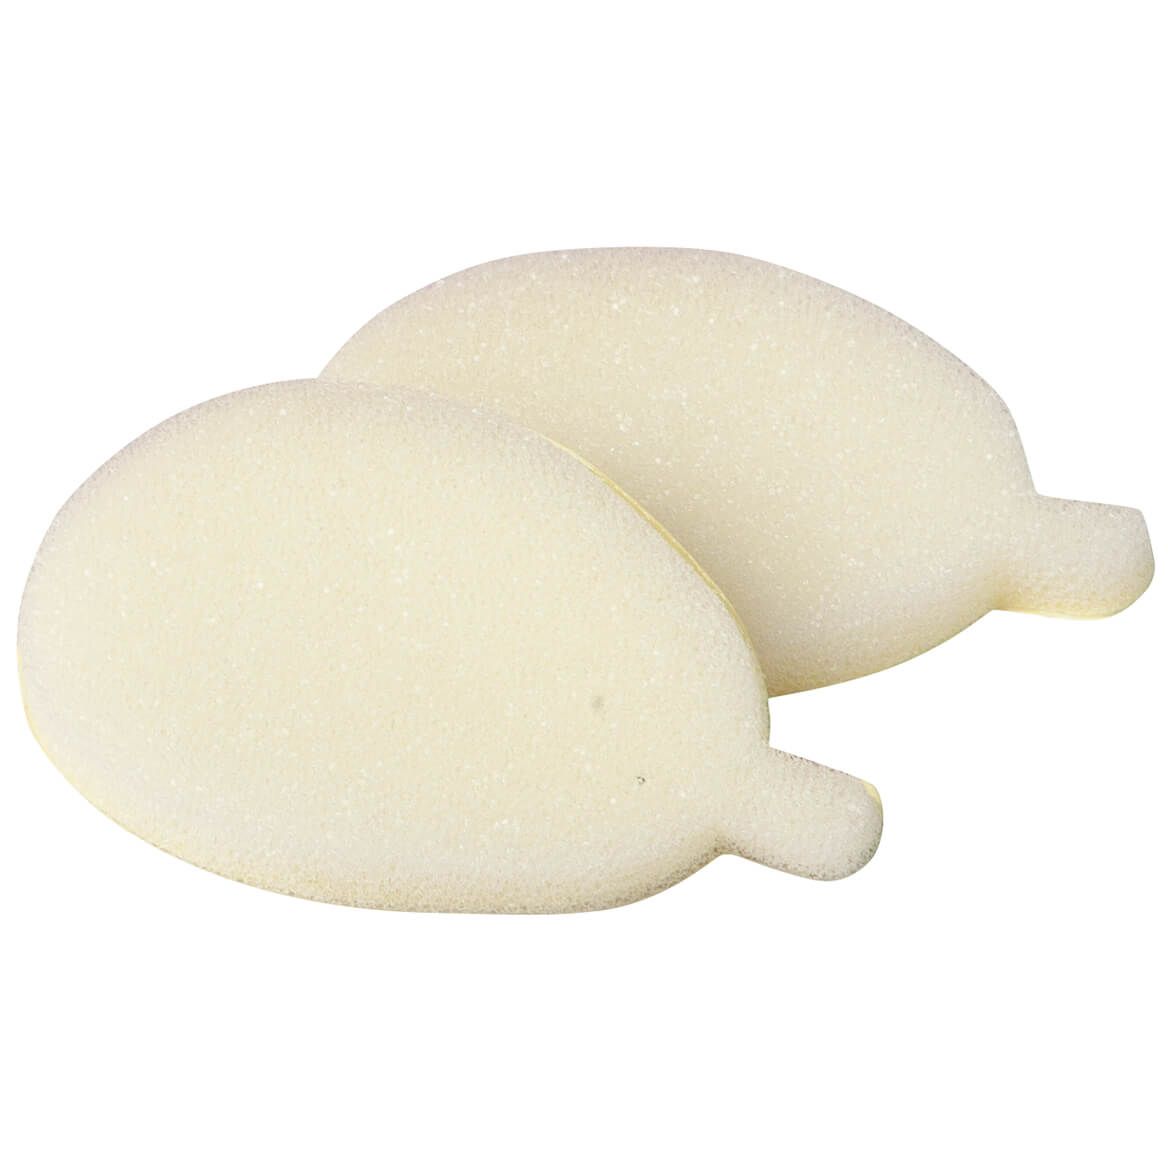 Lotion Applicator Refill Pads - Set of 2 + '-' + 302575